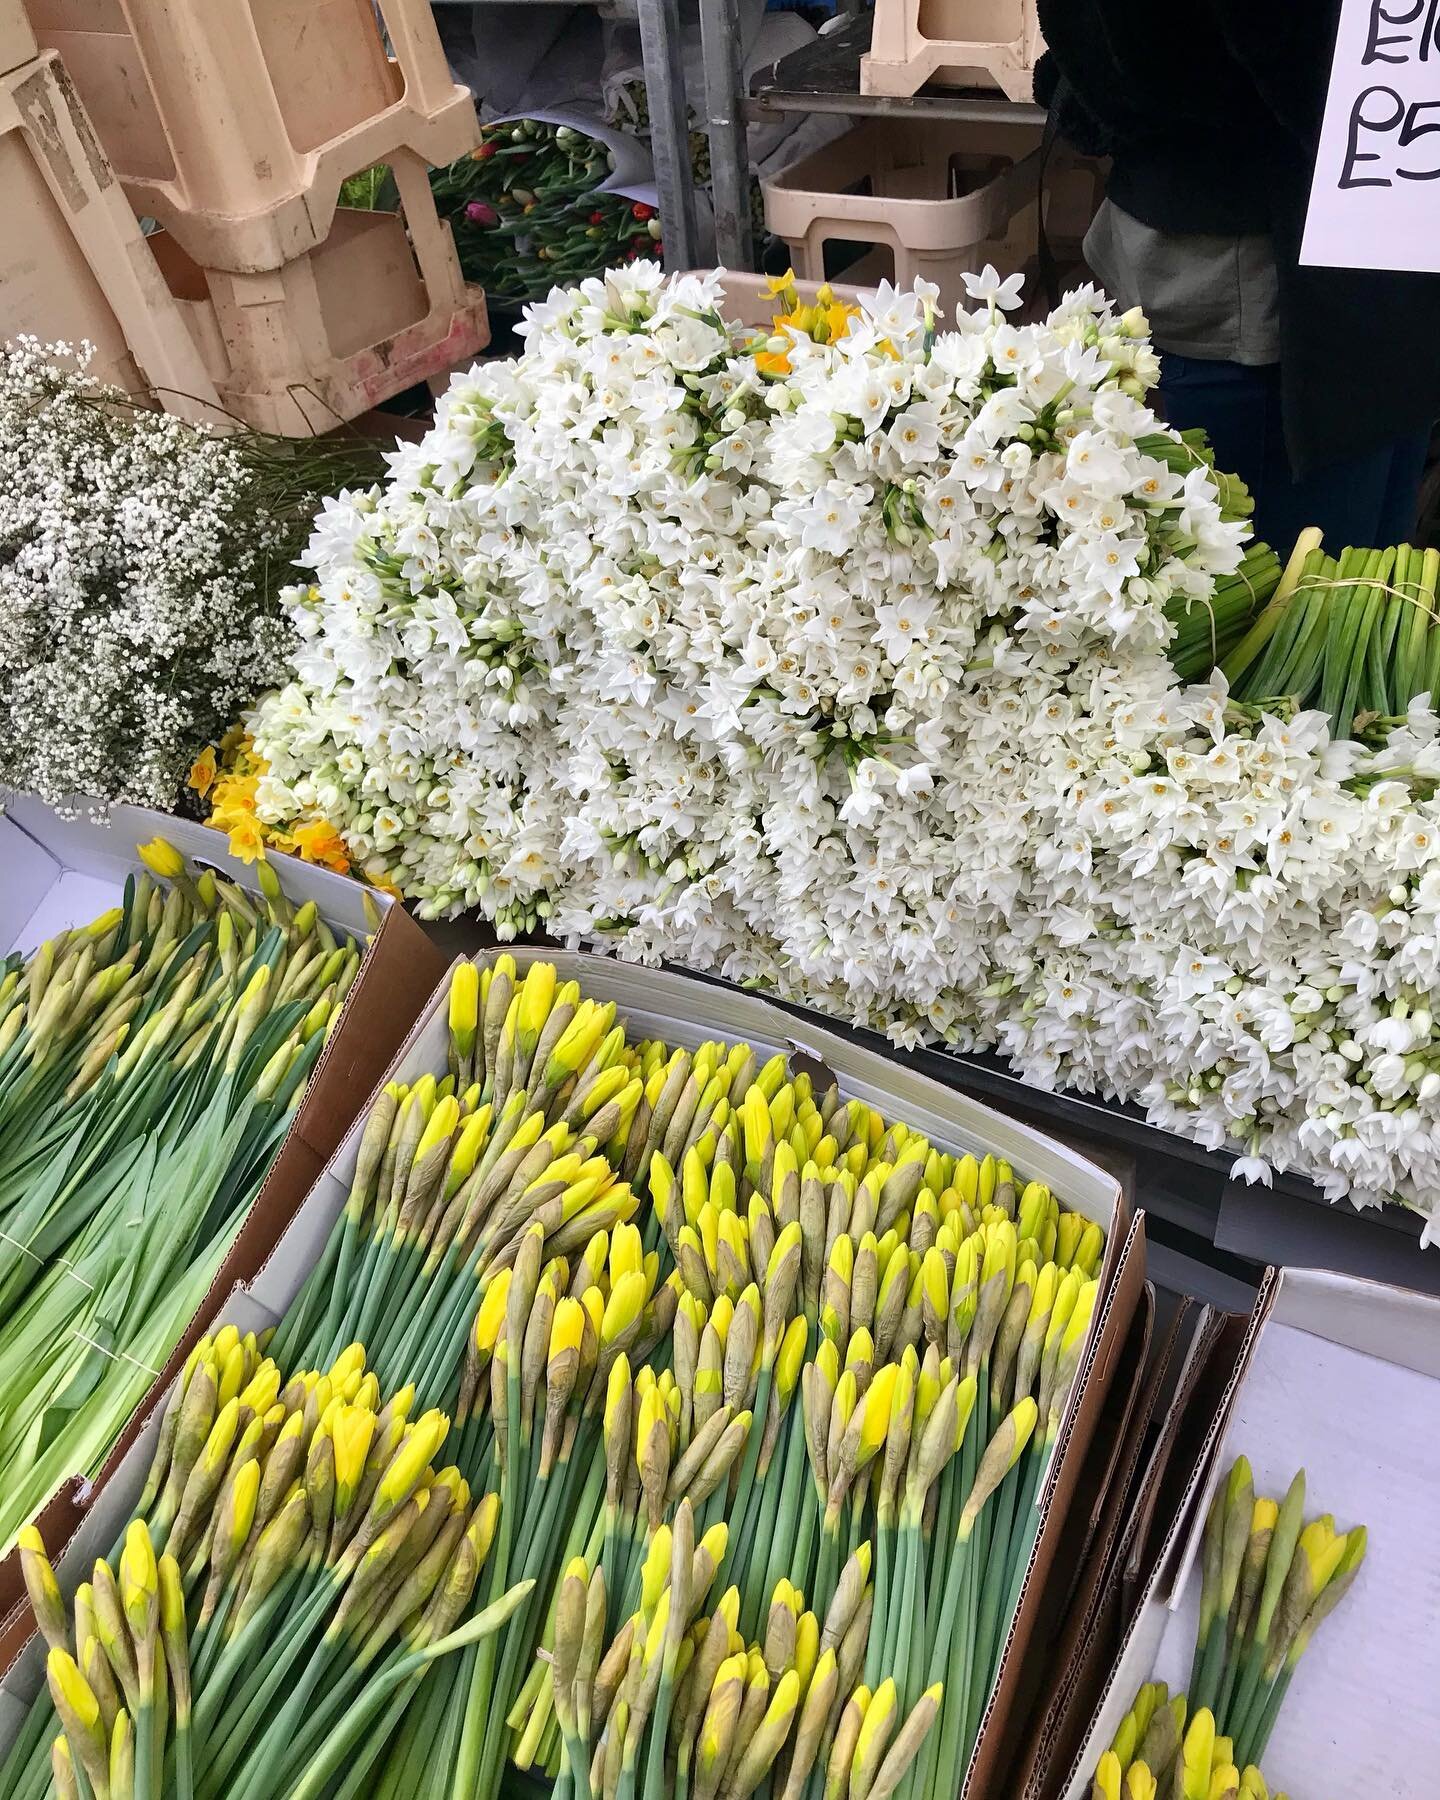 Another Sunday flower market missed 😢we can&rsquo;t wait to FILL the shop with flowers as soon as we can open again. In the meantime, hope everyone is making the most of supermarket Daffodils 🌼